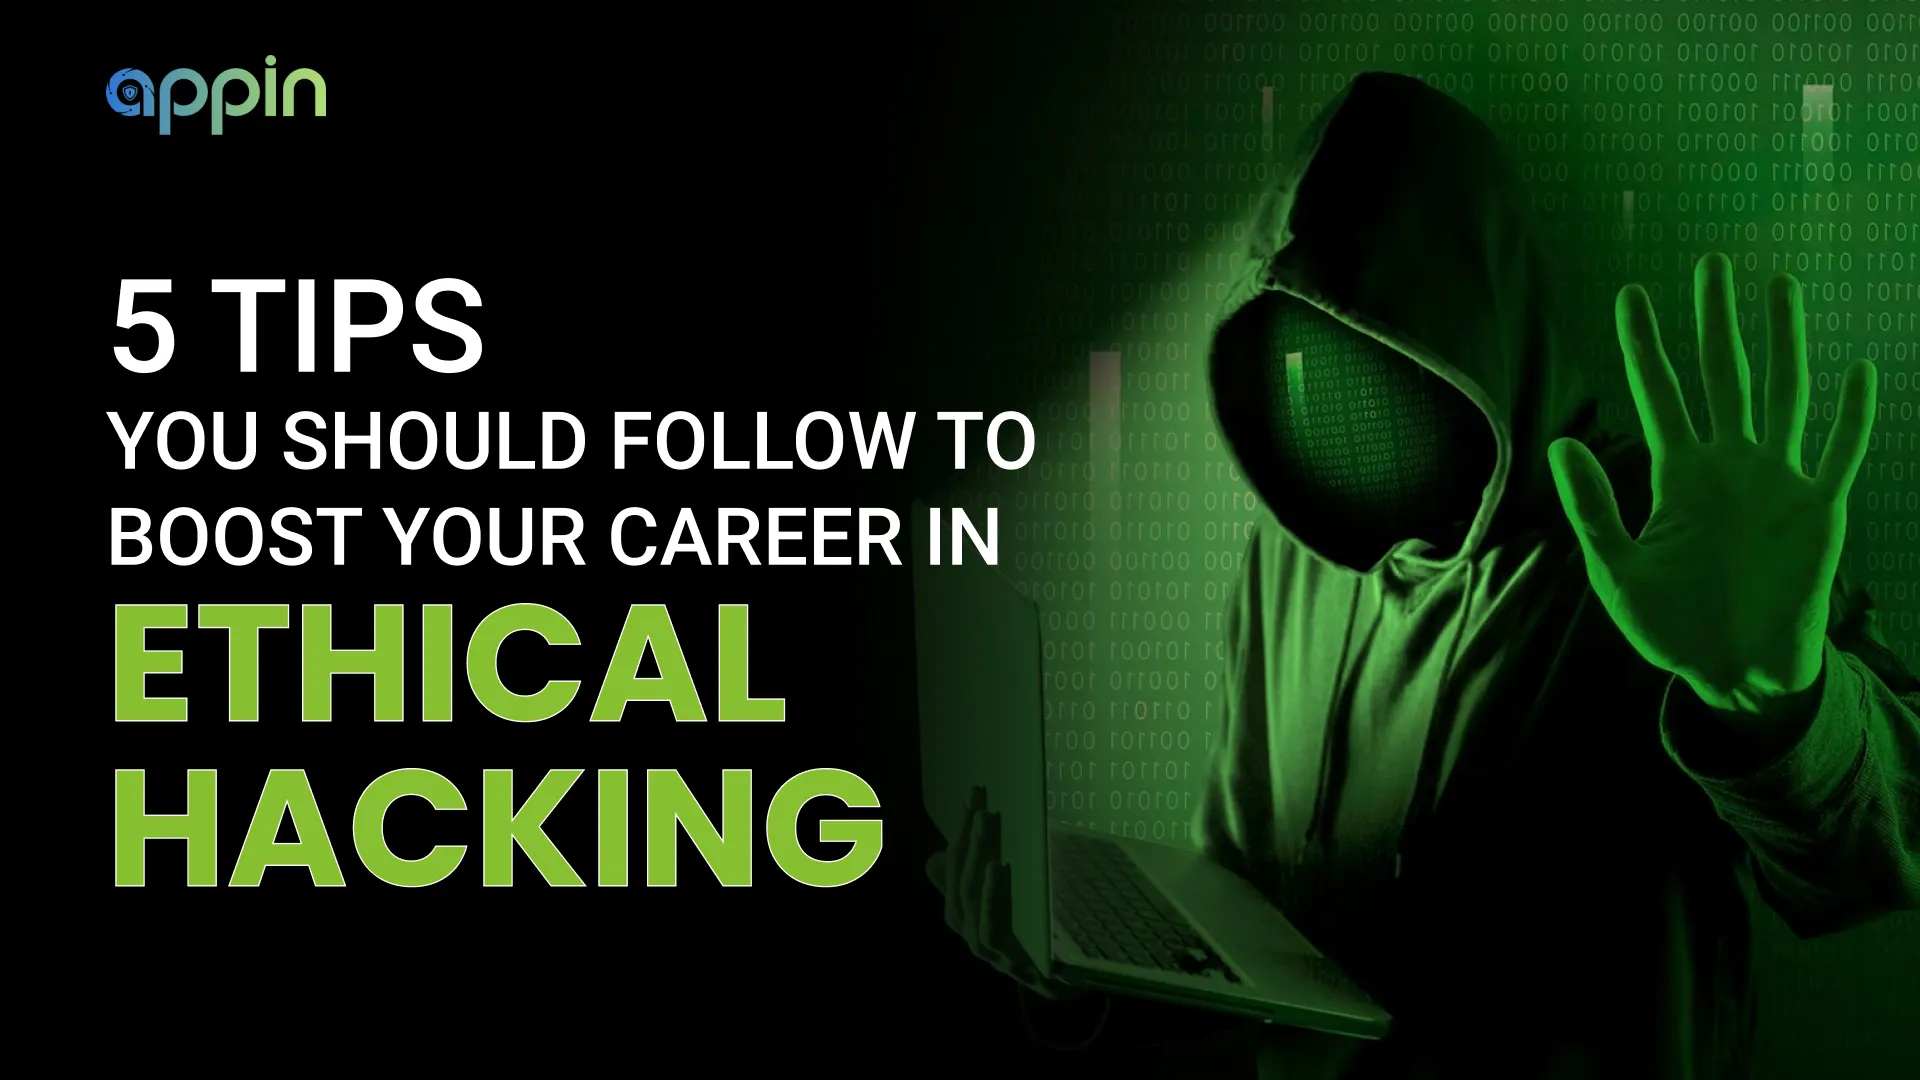 5 tips you should follow to boost your career in ethical hacking